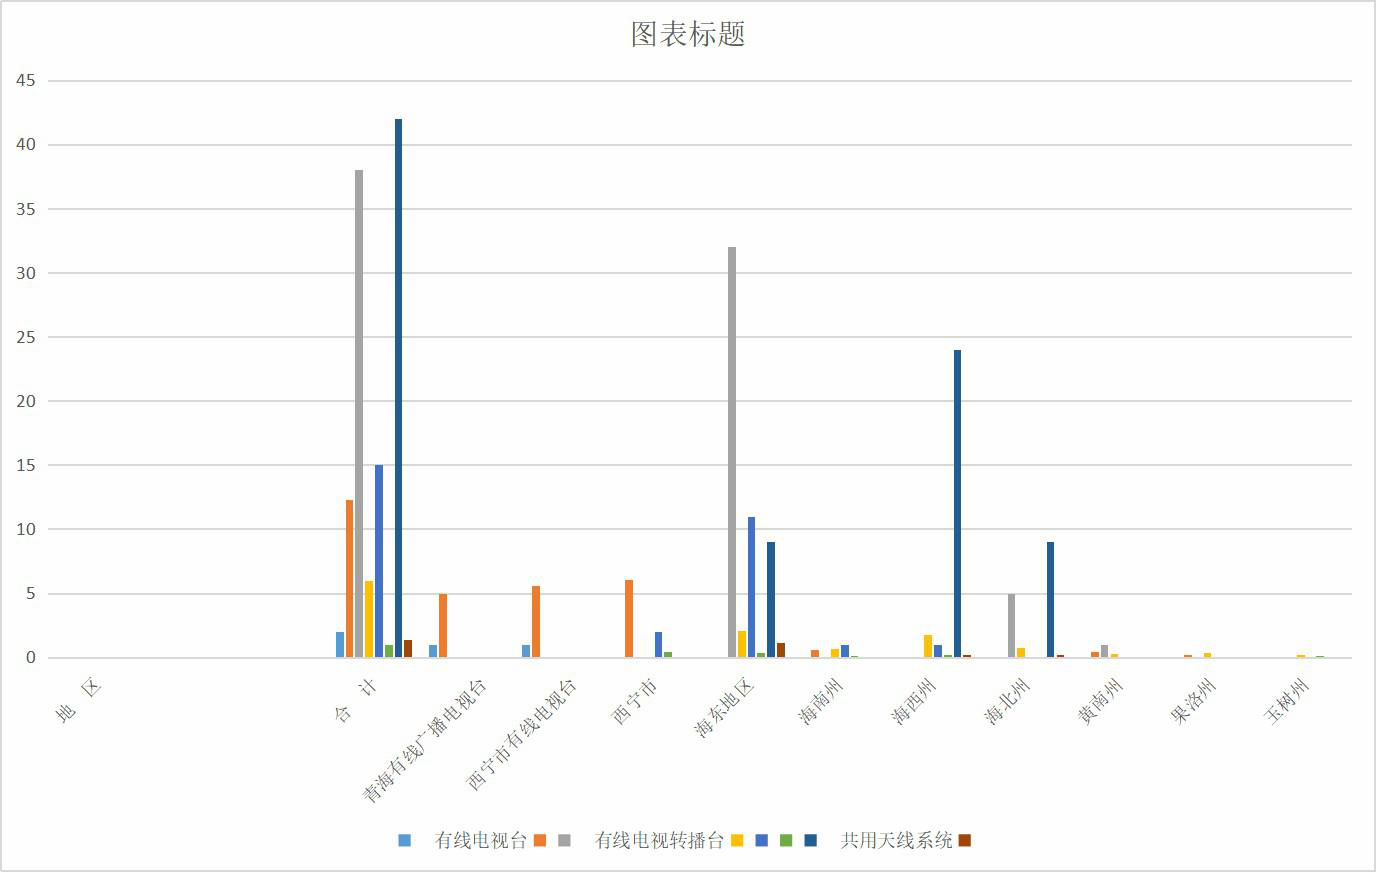 Basic situation of cable TV in Qinghai Province (1998-2010)